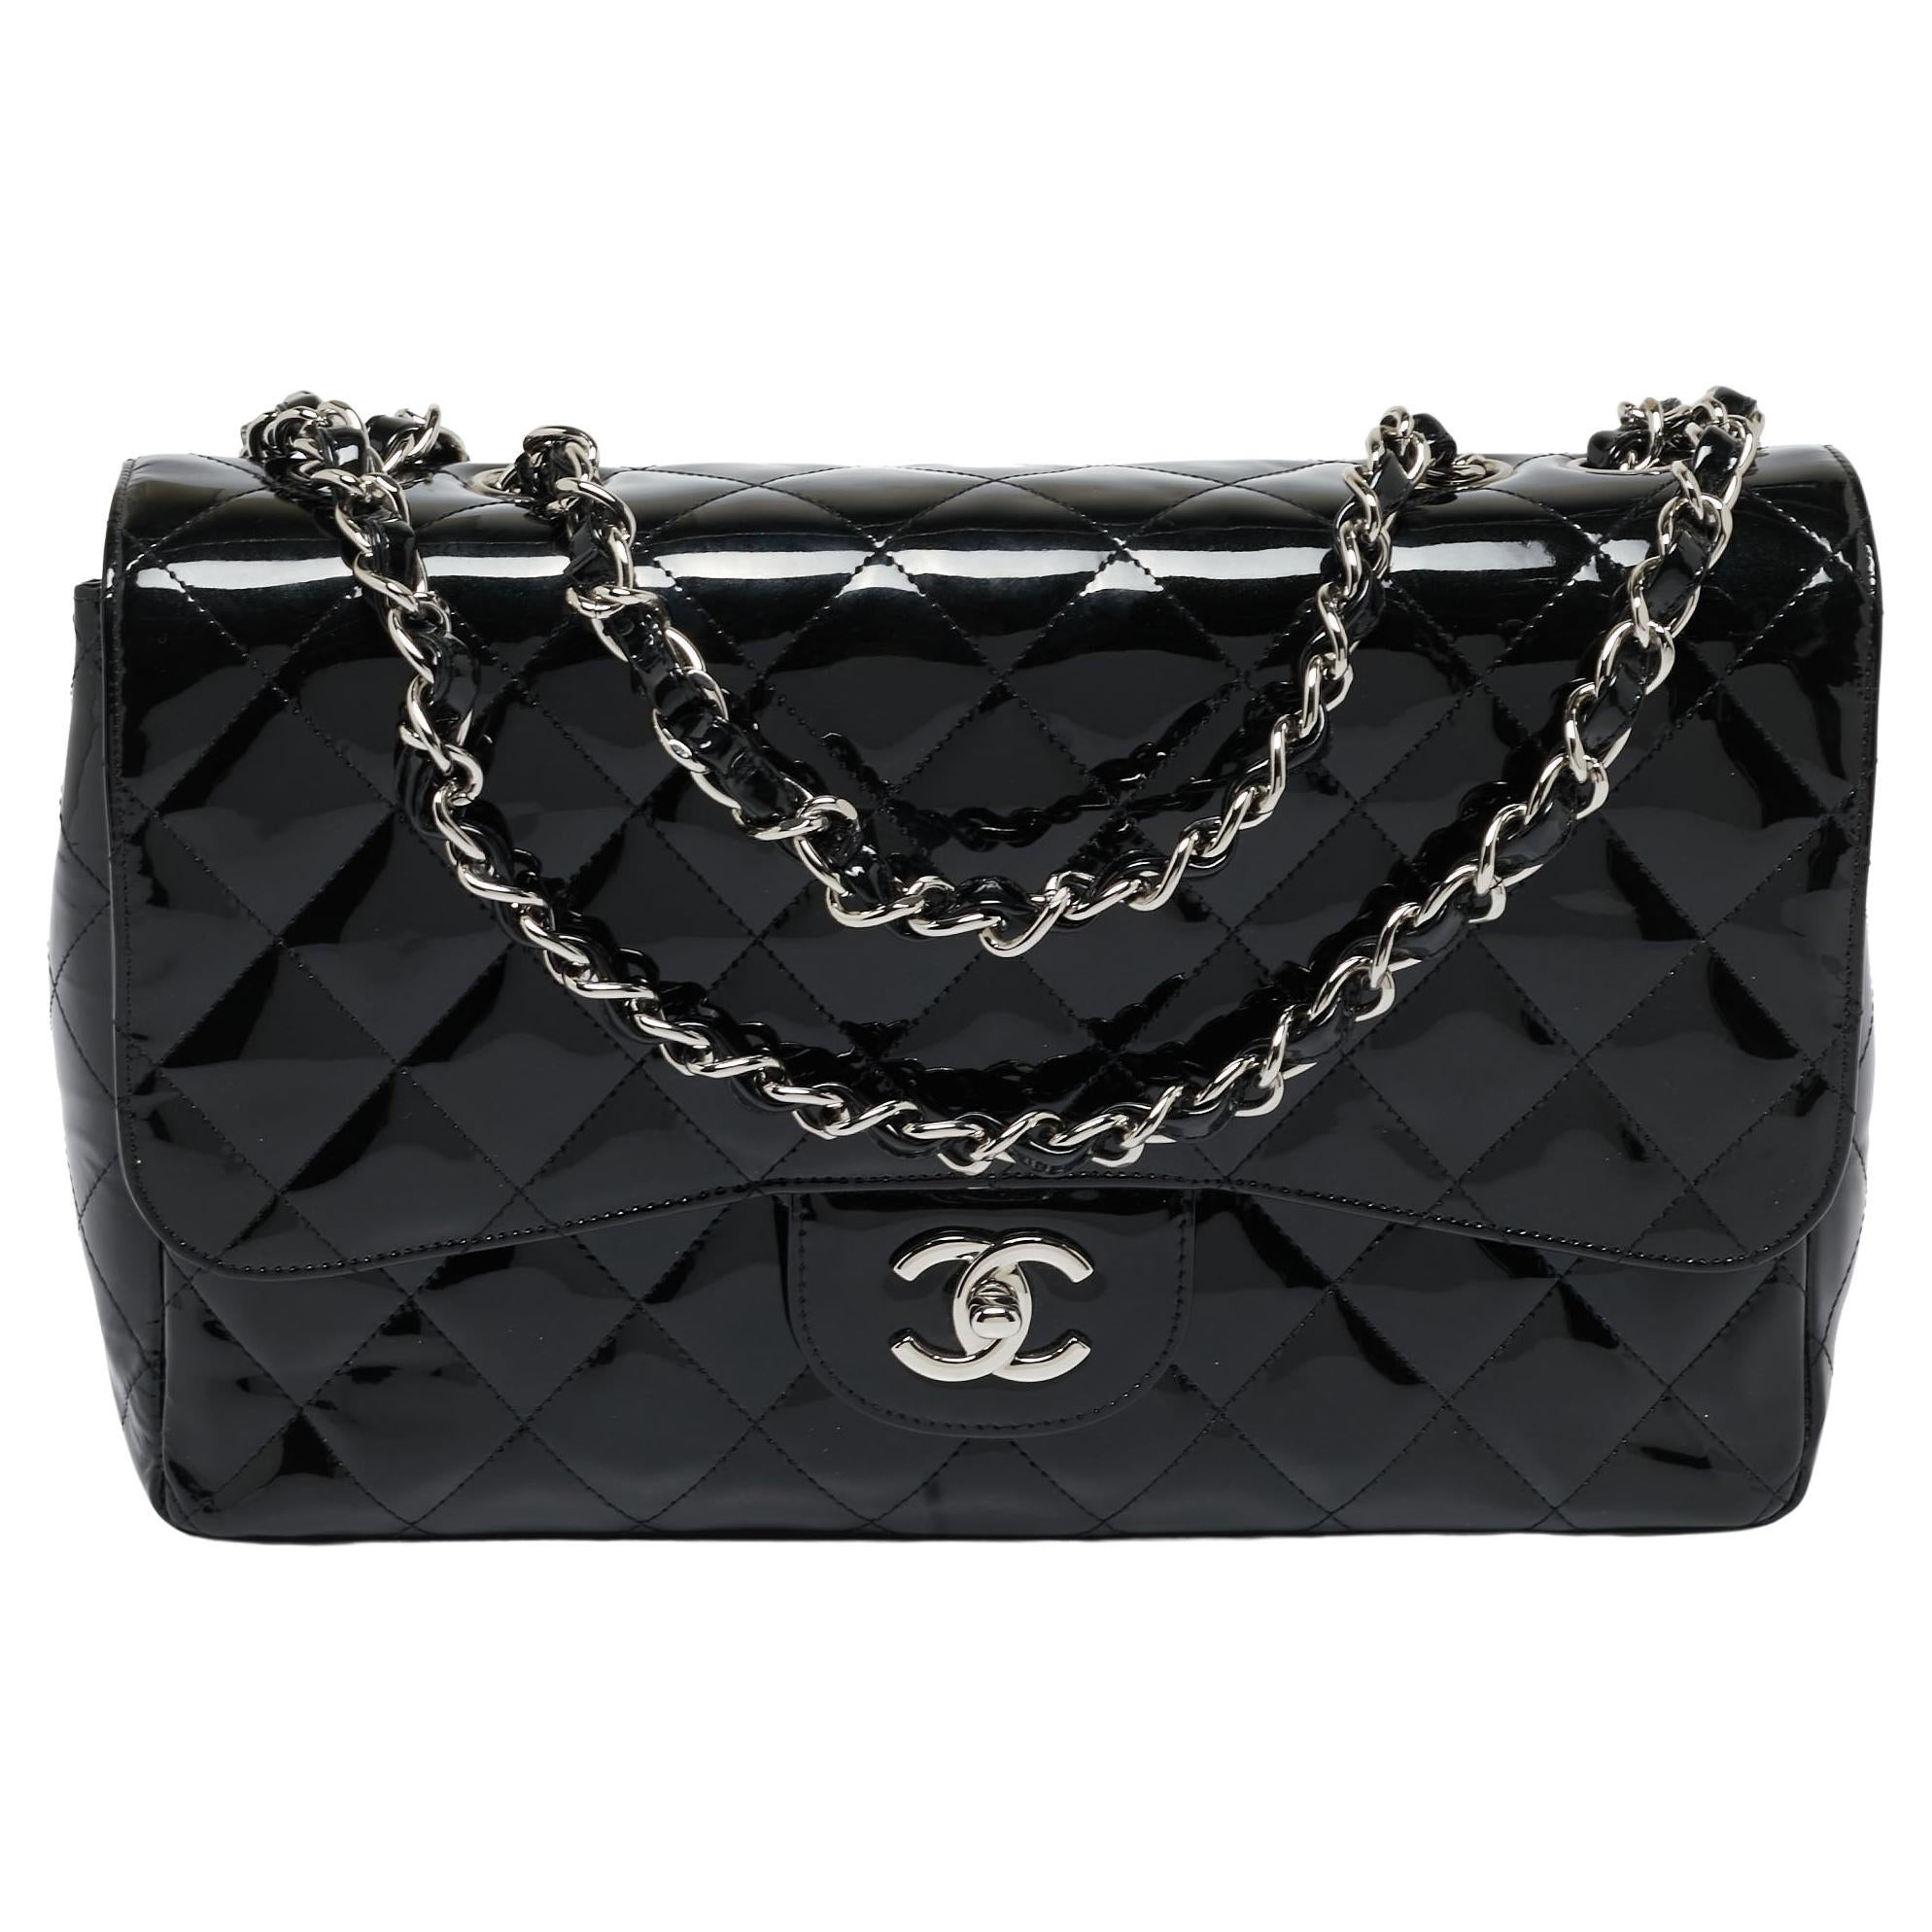 Chanel Metallic Black Quilted Patent Leather Jumbo Classic Single Flap Bag